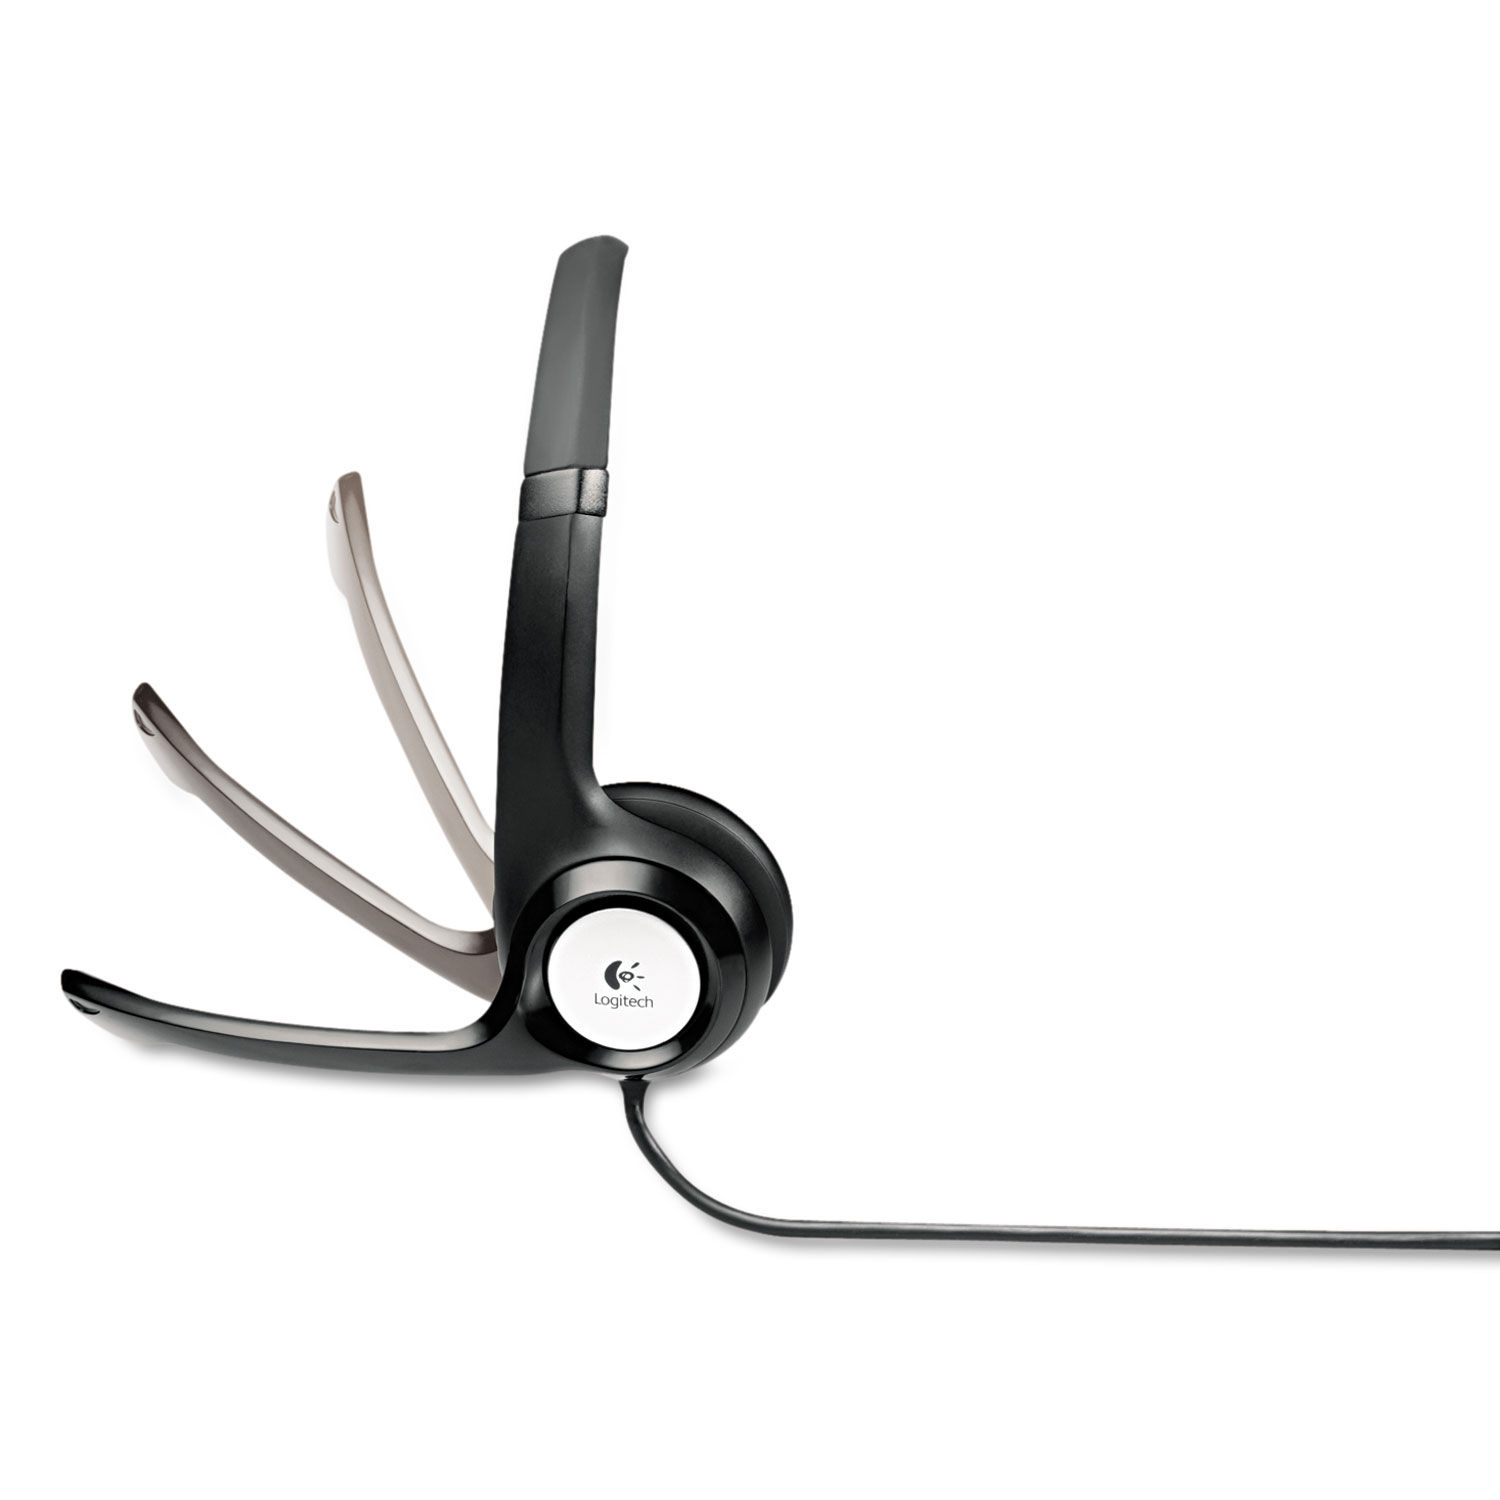 H390 Binaural Over The Head USB Headset with Noise-Canceling Microphone by  Logitech® LOG981000014 